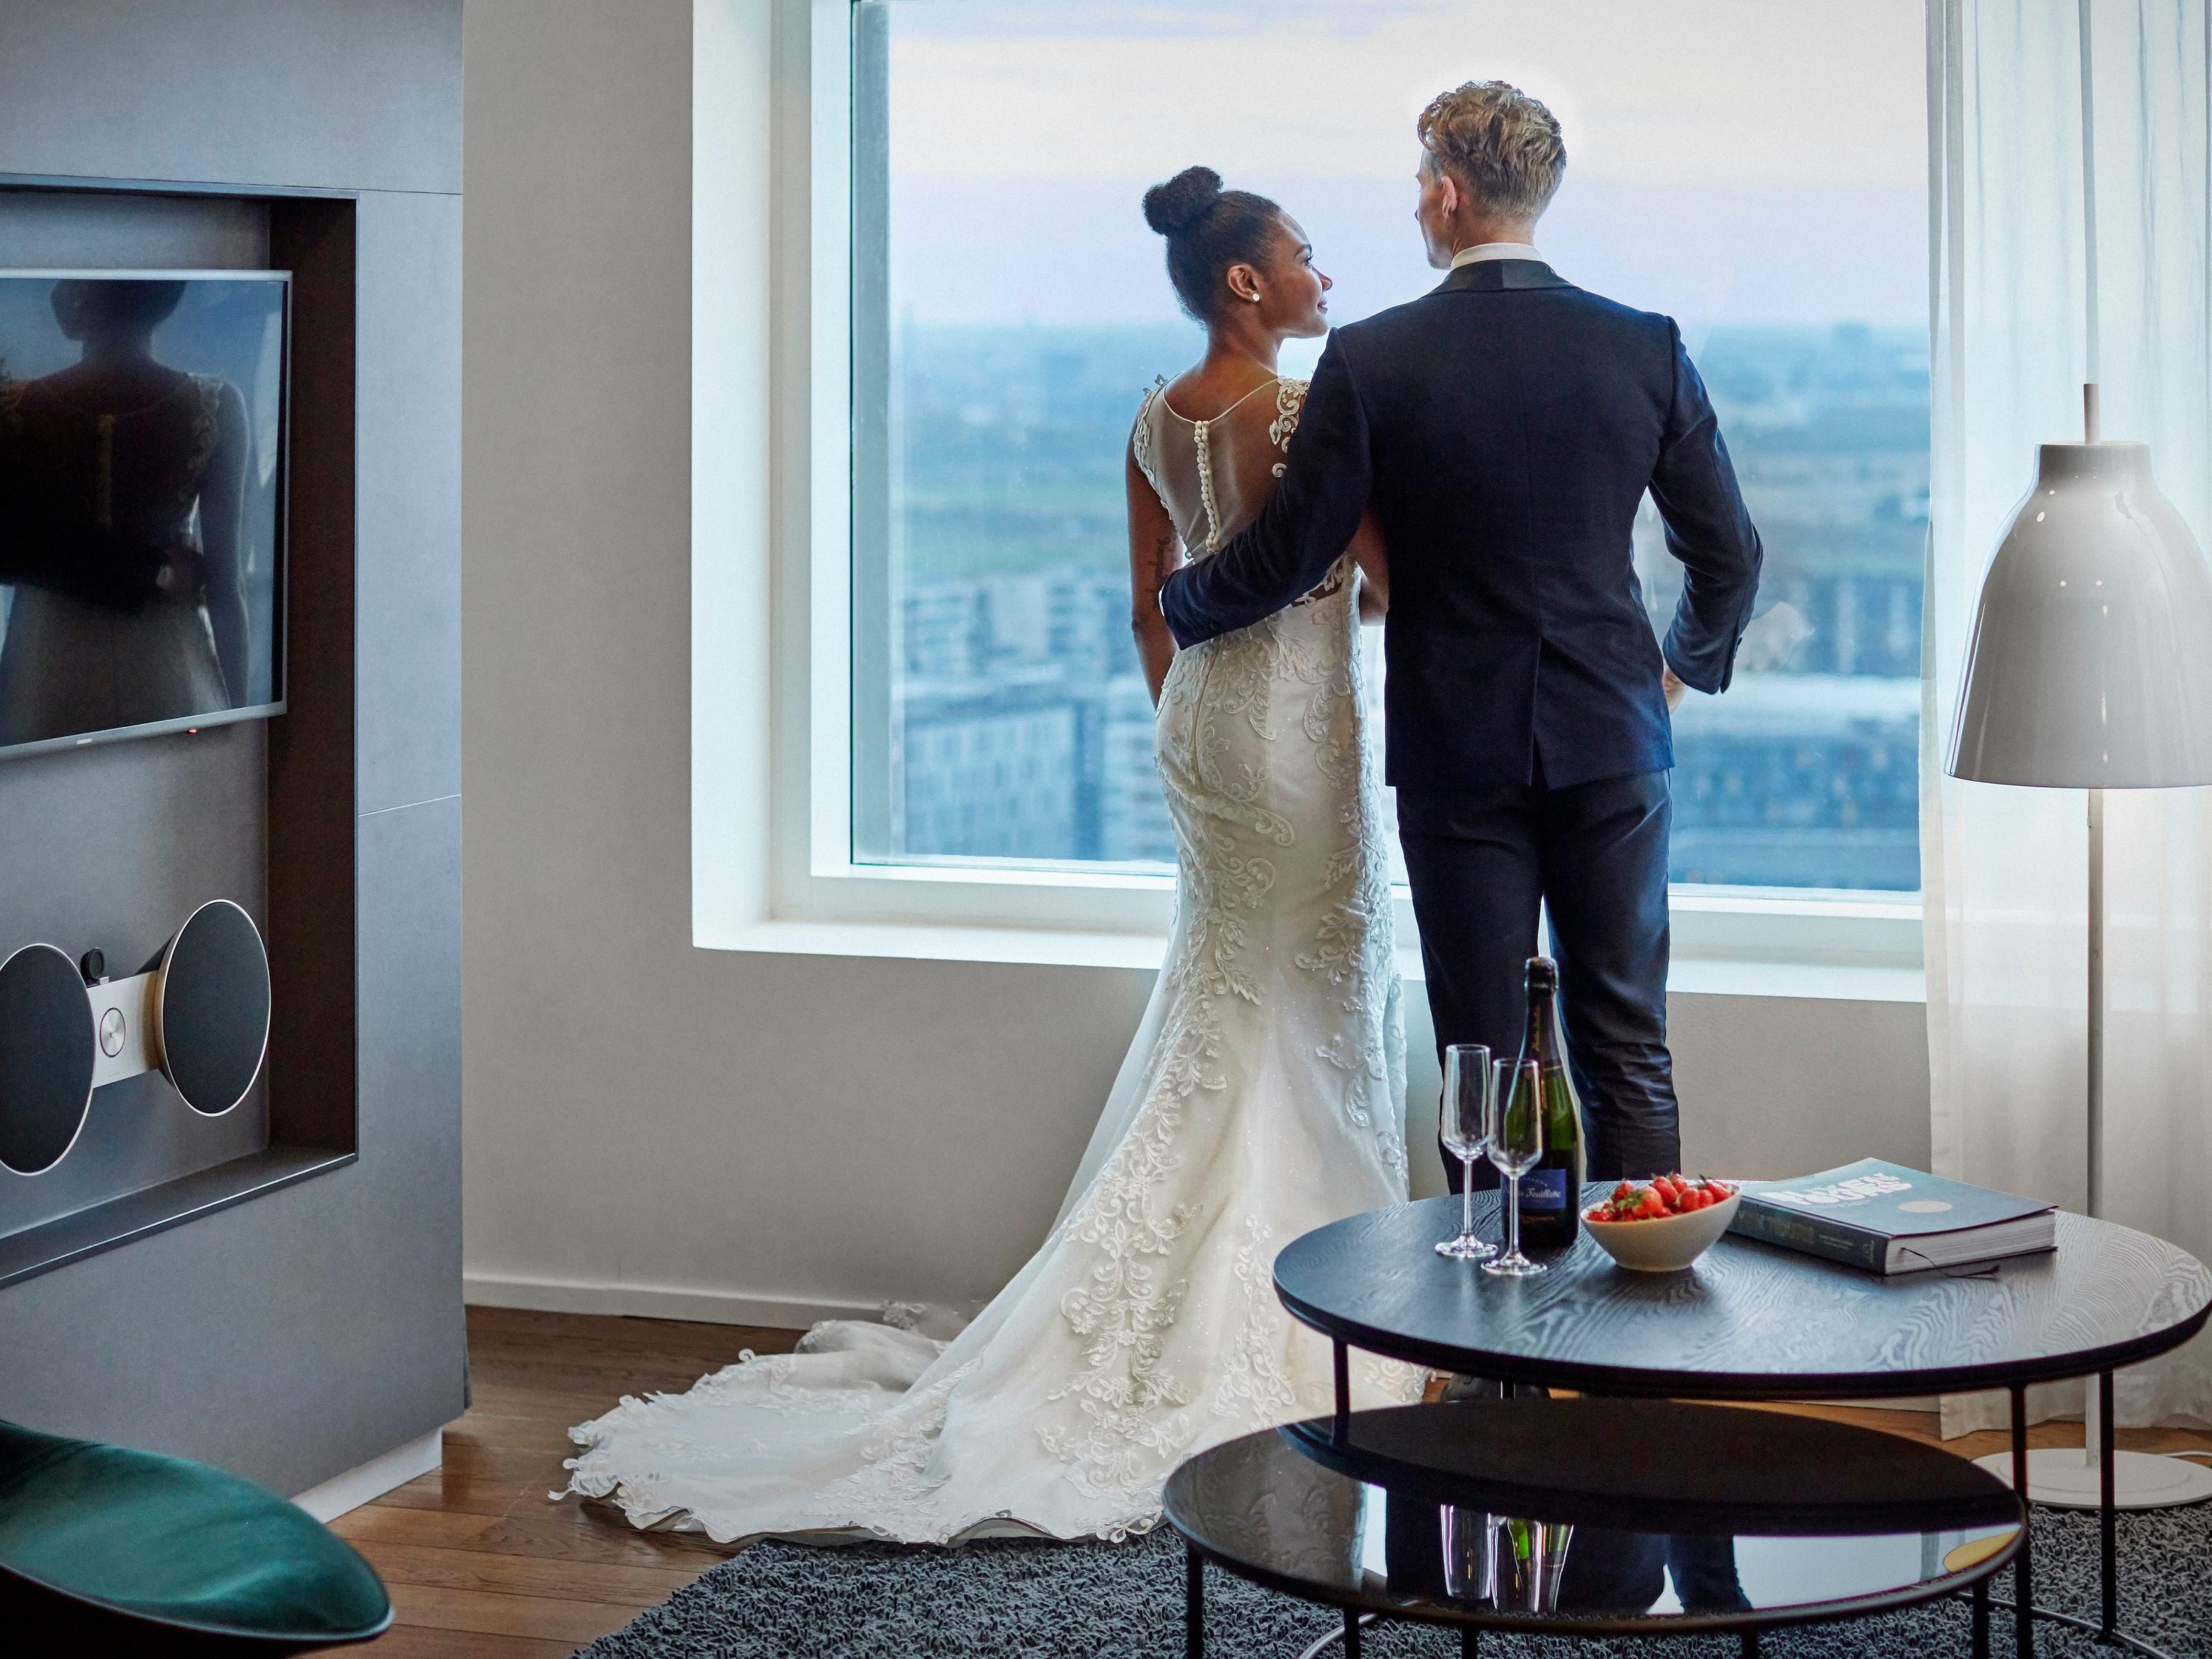 Say ”I do” in the unique surroundings of our stunning Atrium. Our facilities include a ballroom that can be transformed to meet your needs, large rooms and suites overlooking Ørestad. We offer a central location with a parking facilities, our very own talented chefs and much more!